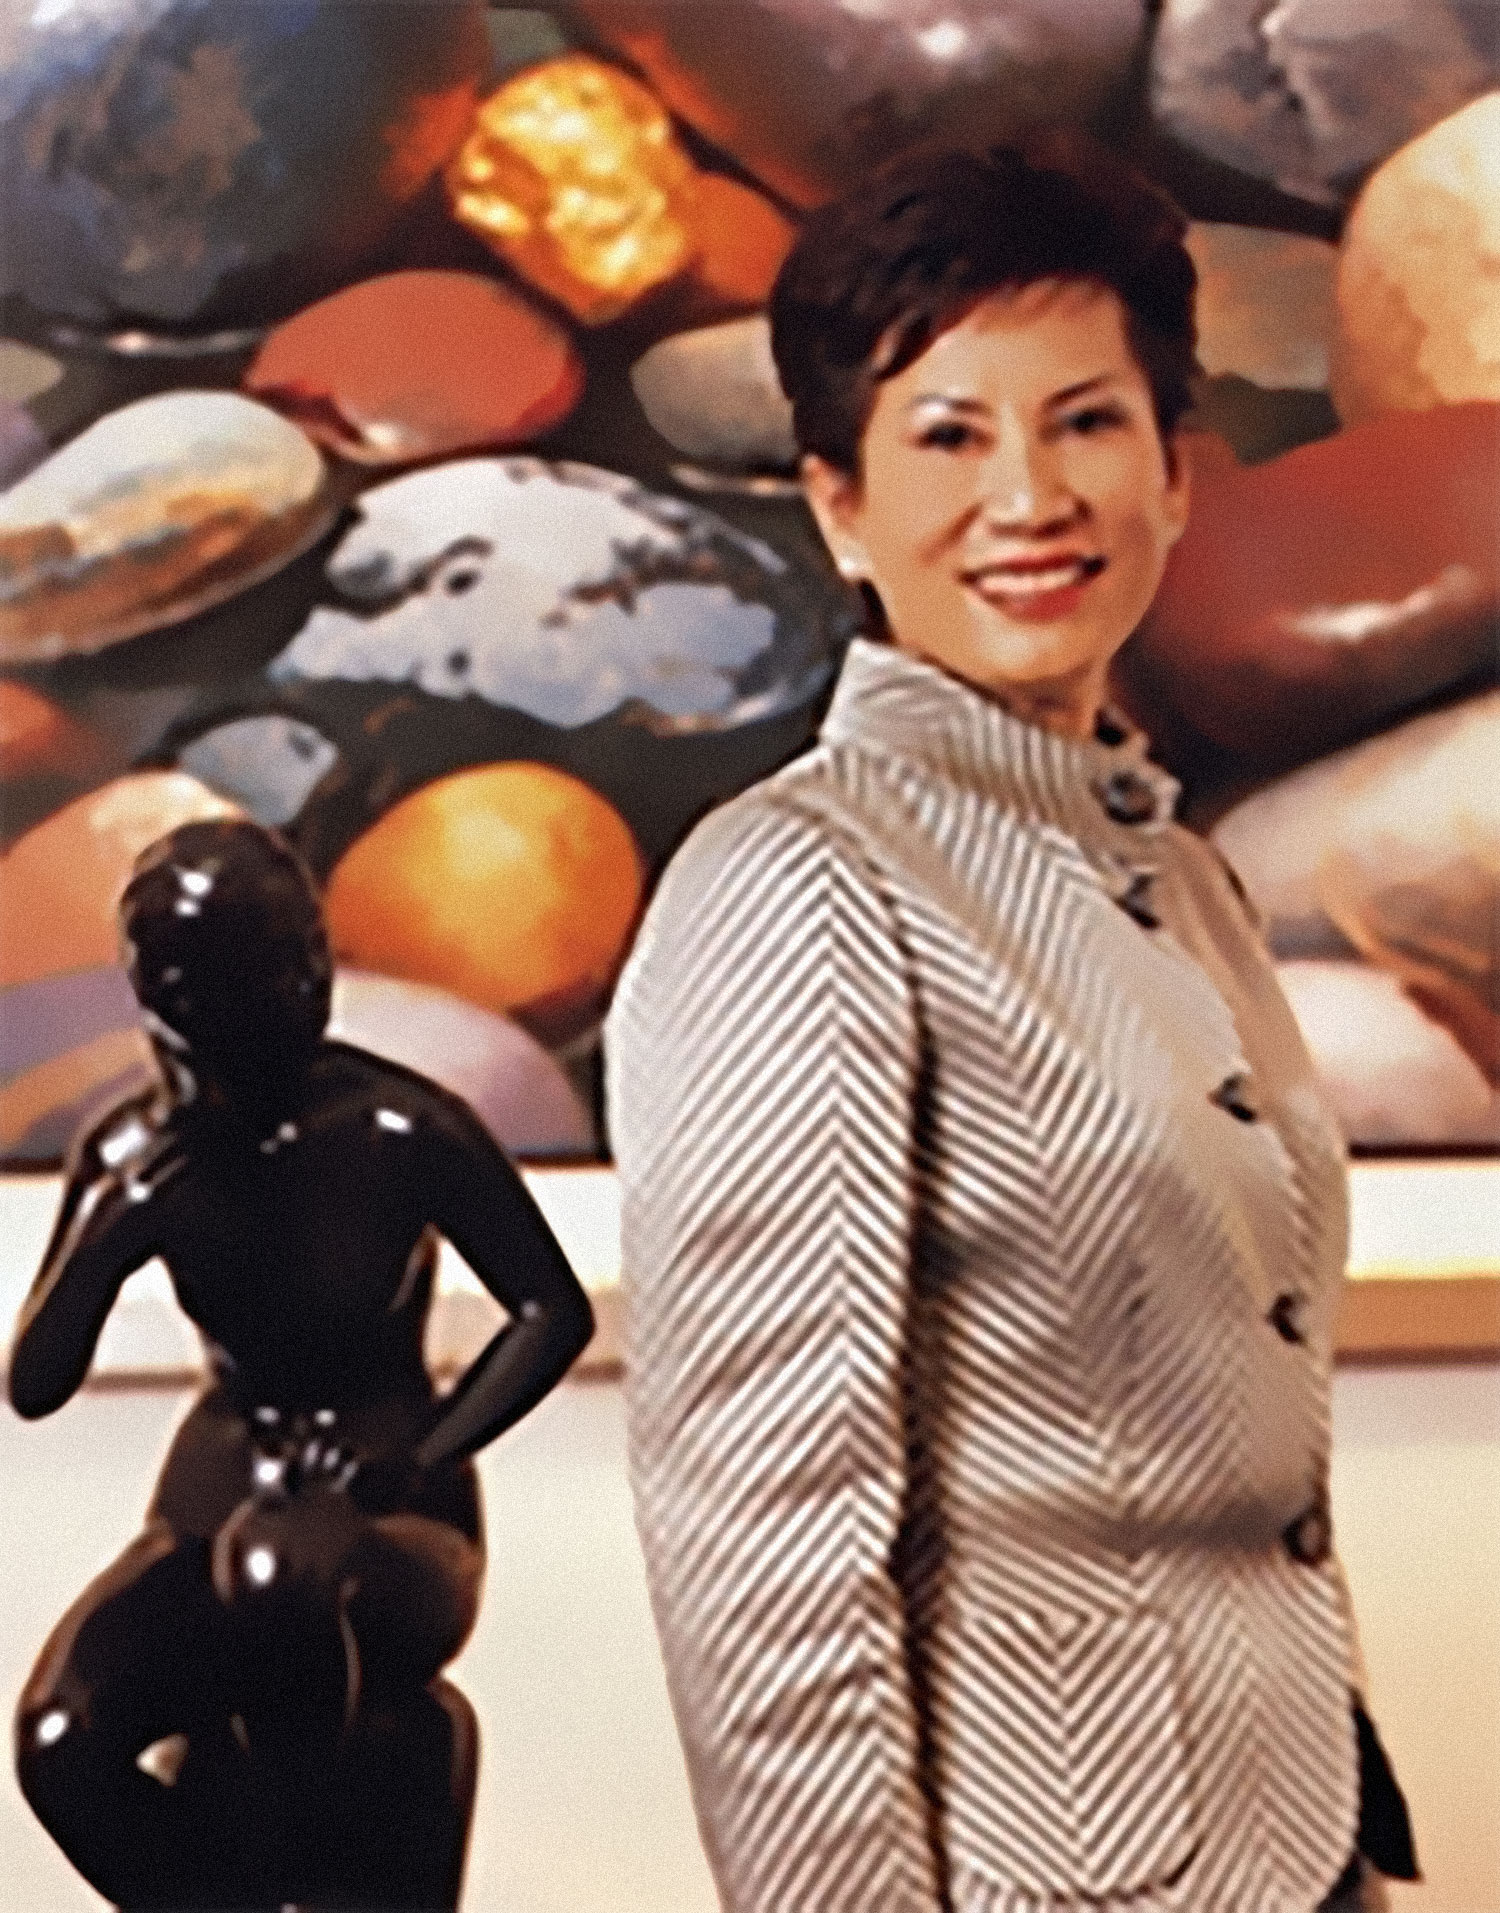 <p>The Sombat Permpoon Gallery : was founded by one of Thailand&rsquo;s most prominent and renowned art collectors,&nbsp;<br />Sombat Wattananthai<br /><br />Miss. Sombat has been a leading collector of the Thai art community for over 40 years. Beginning her impeccable Gallerist career back in 1979 when she opened her first art gallery in Silom, Bangkok. Named Sombat Gallery</p>
<p>From humble beginnings, after much acclaimed success she continued to open further 3 galleries. In 1982, Sombat Gallery was opened at River City Plaza, the Royal Orchid Sheraton Hotel in 1984, Dusit Thani Hotel in 1985. Followed in the by other two galleries at Siam Inter Continental Hotel in 1992 and the prestigious Nai Lert Park Hotel in 1993.</p>
<p>In 1995, Ms. Sombat converted the 6 story office building into the current art gallery space and moved her entire art collection, in excess of over 10,000 works of art to the now Sombat Permpoon Gallery building.</p>